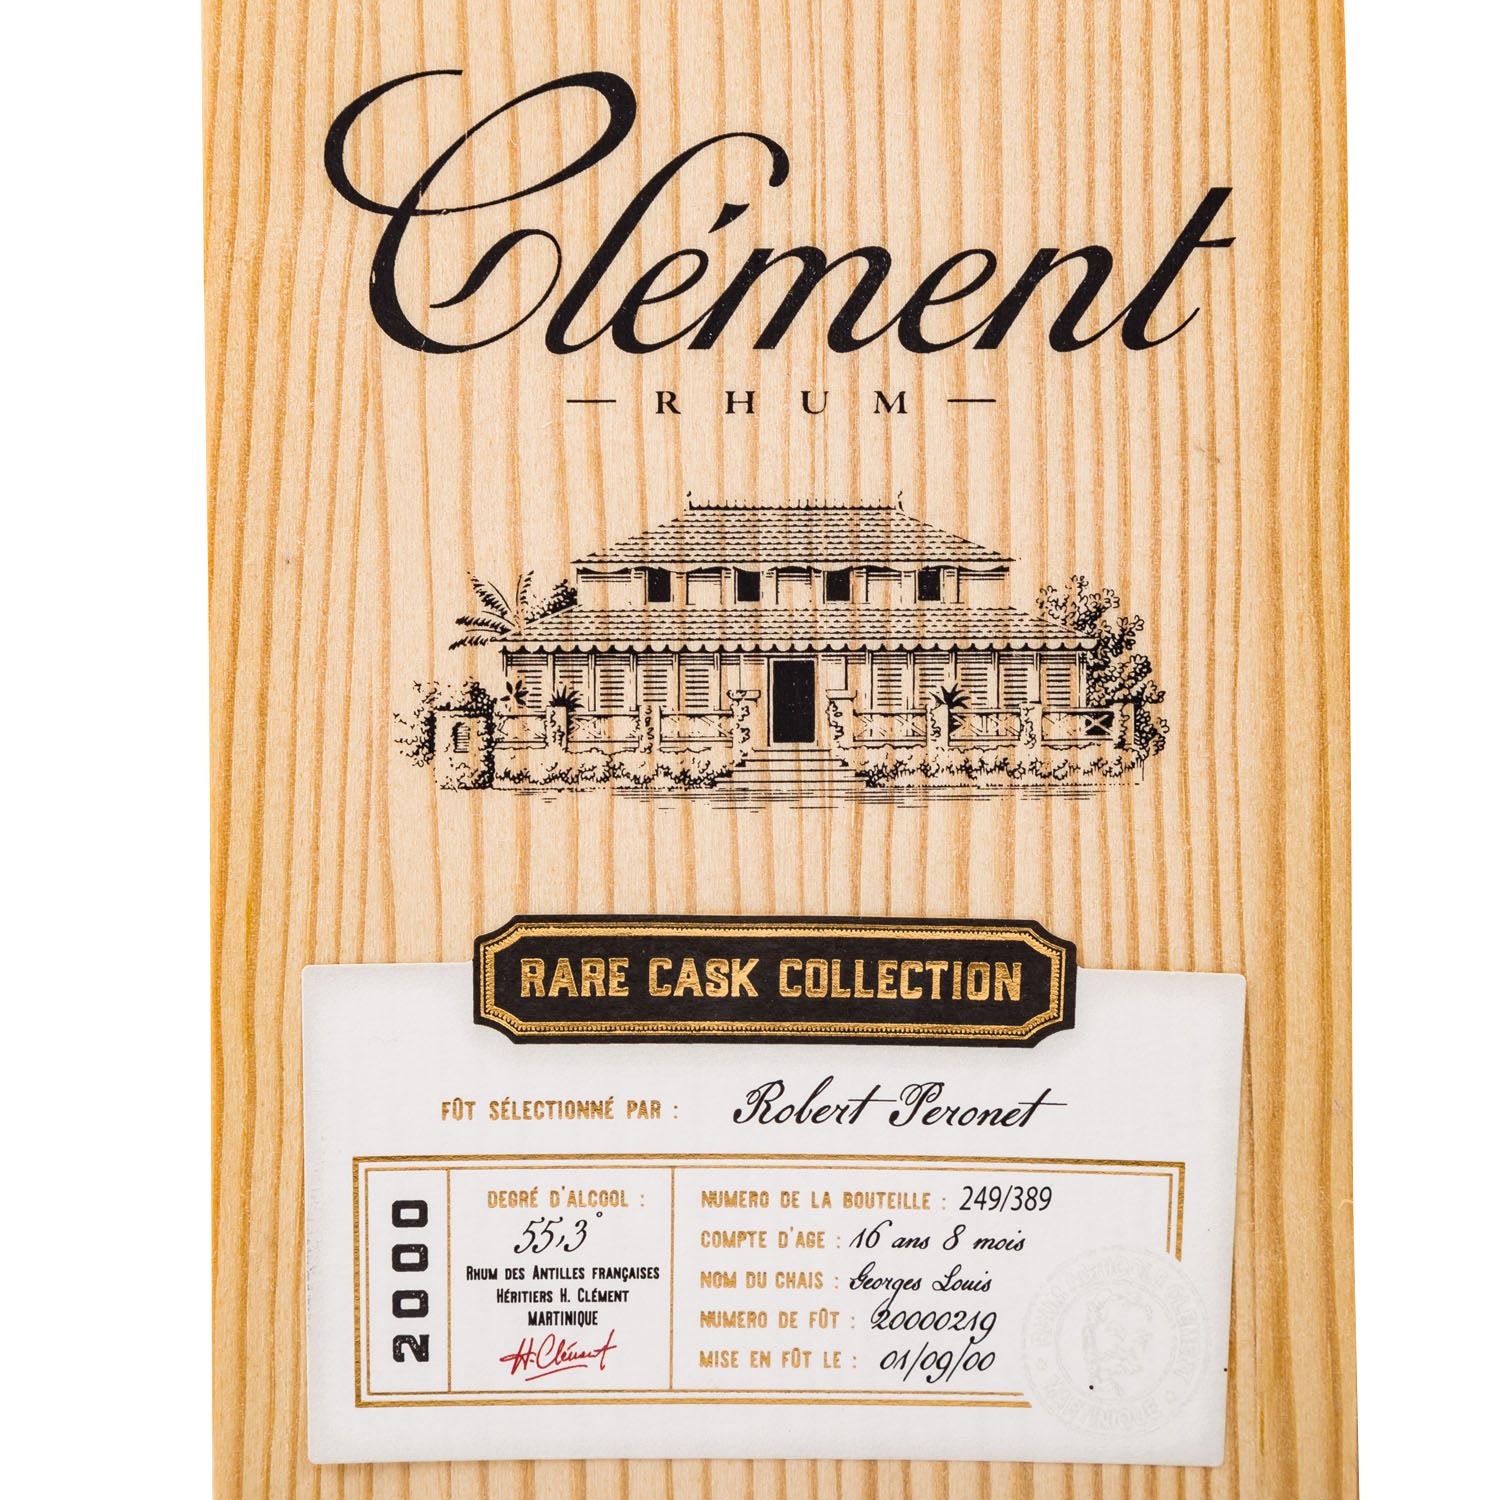 CLÉMENT "25 Years Old" Rare Cask Collection Rum - Image 2 of 7